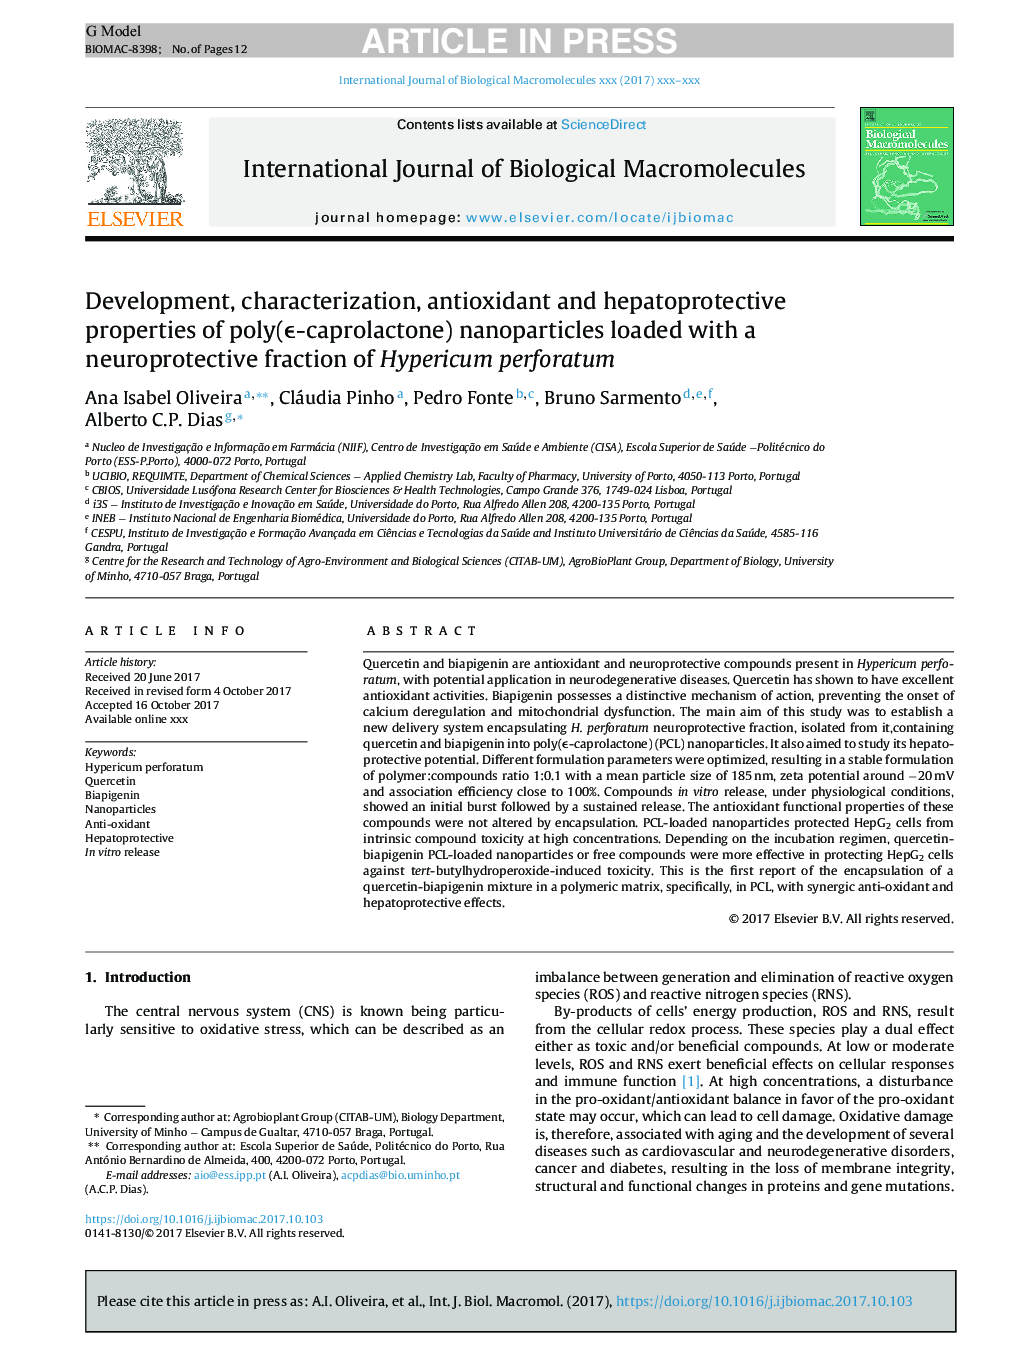 Development, characterization, antioxidant and hepatoprotective properties of poly(Æ-caprolactone) nanoparticles loaded with a neuroprotective fraction of Hypericum perforatum